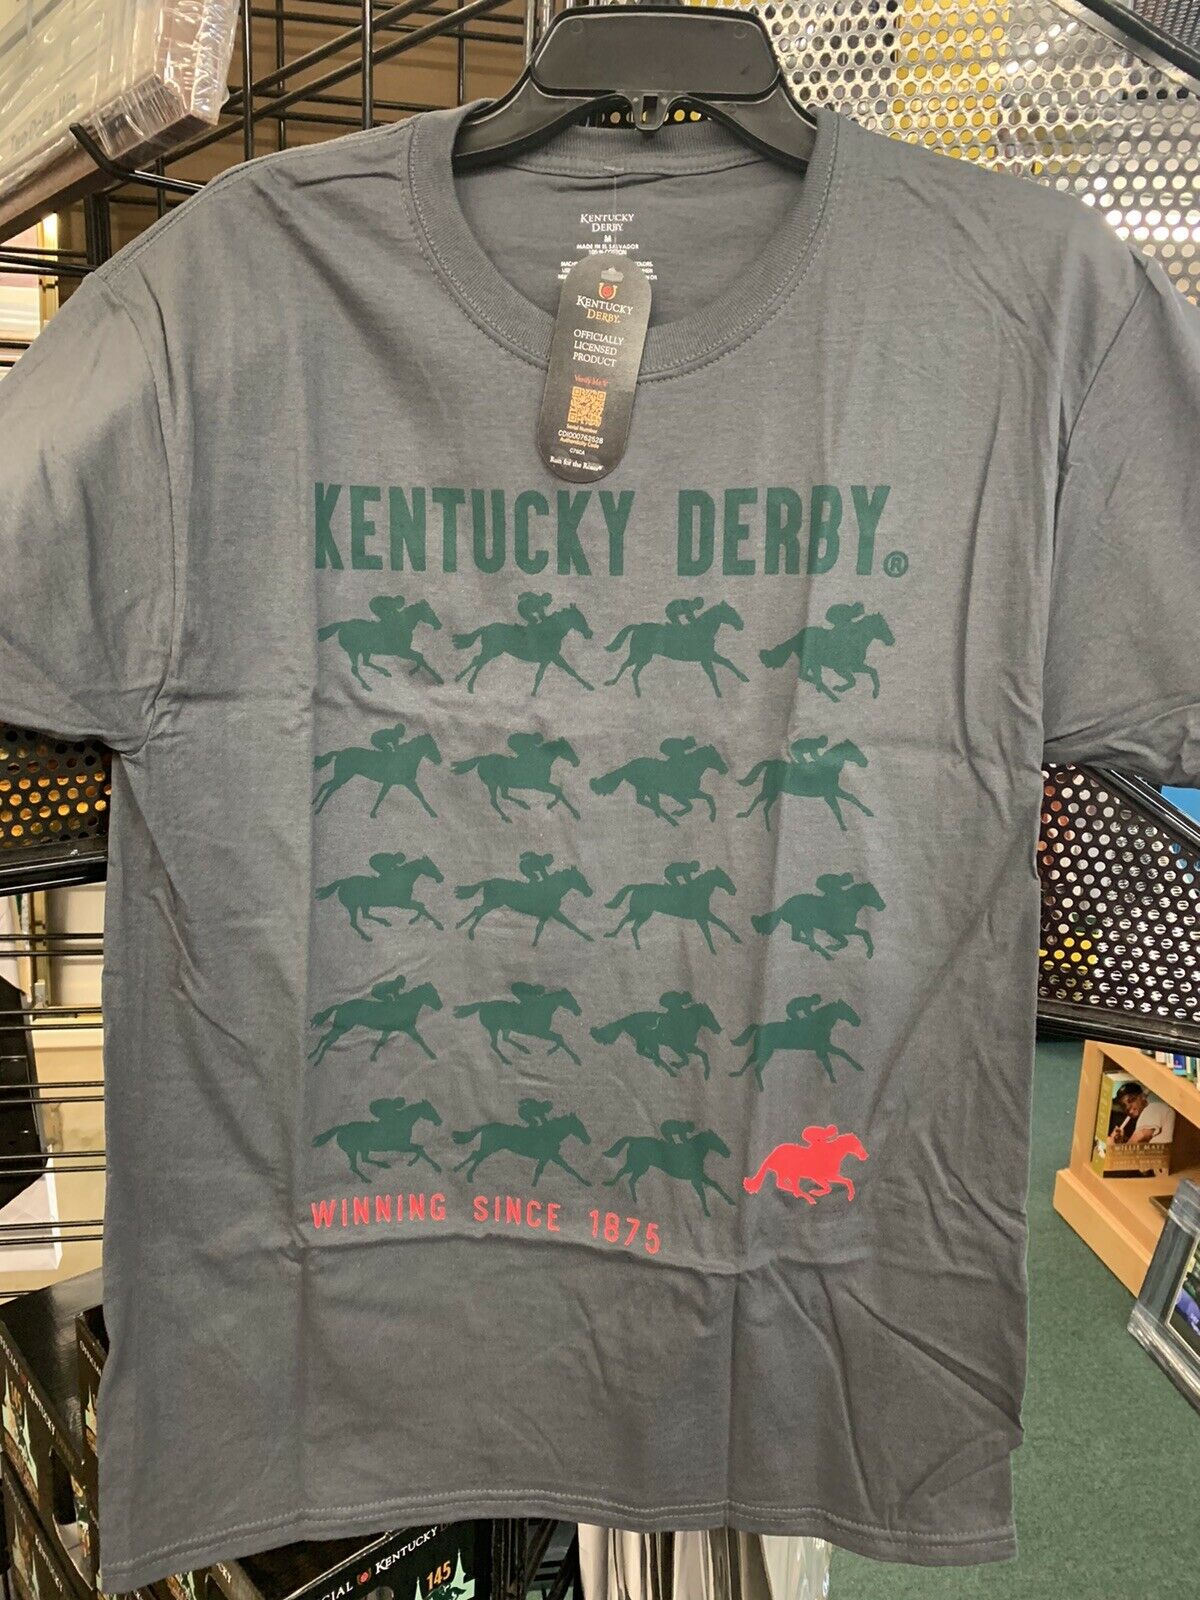 Kentucky Derby 146 Shirt With No Date   Xx-large